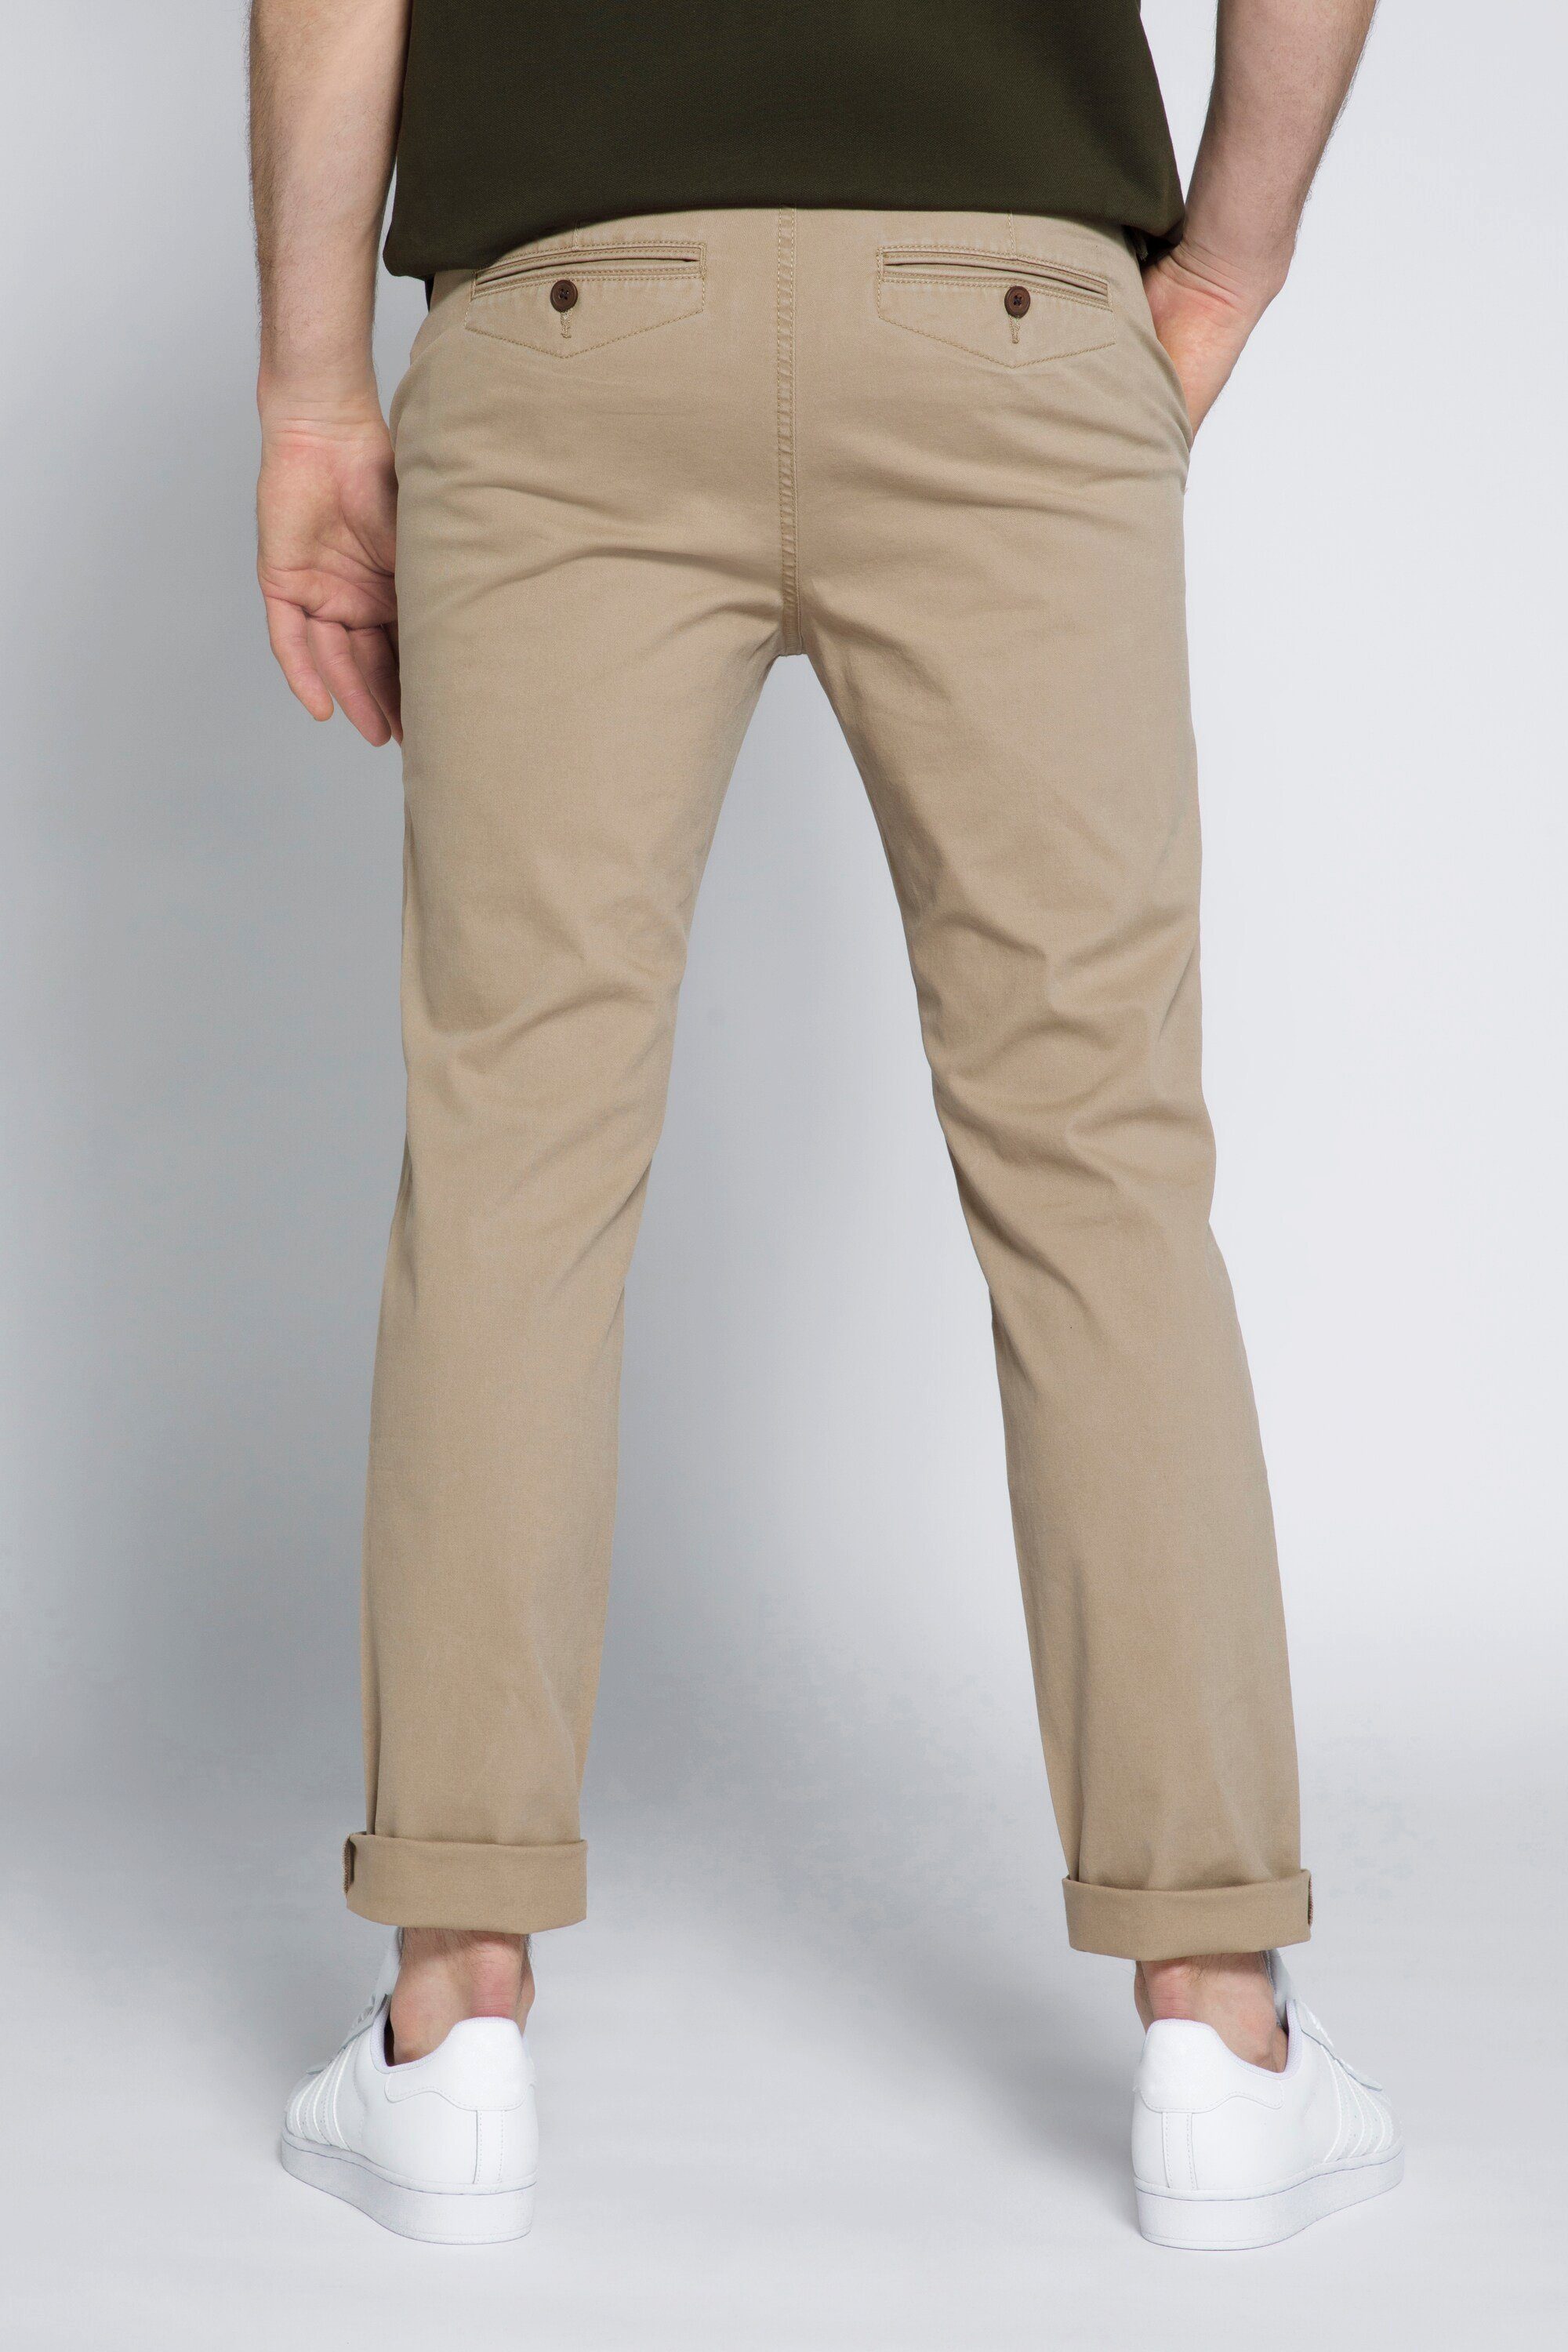 STHUGE Chinohose STHUGE Chino Hose Fit Fit beige Bauch Straight Modern